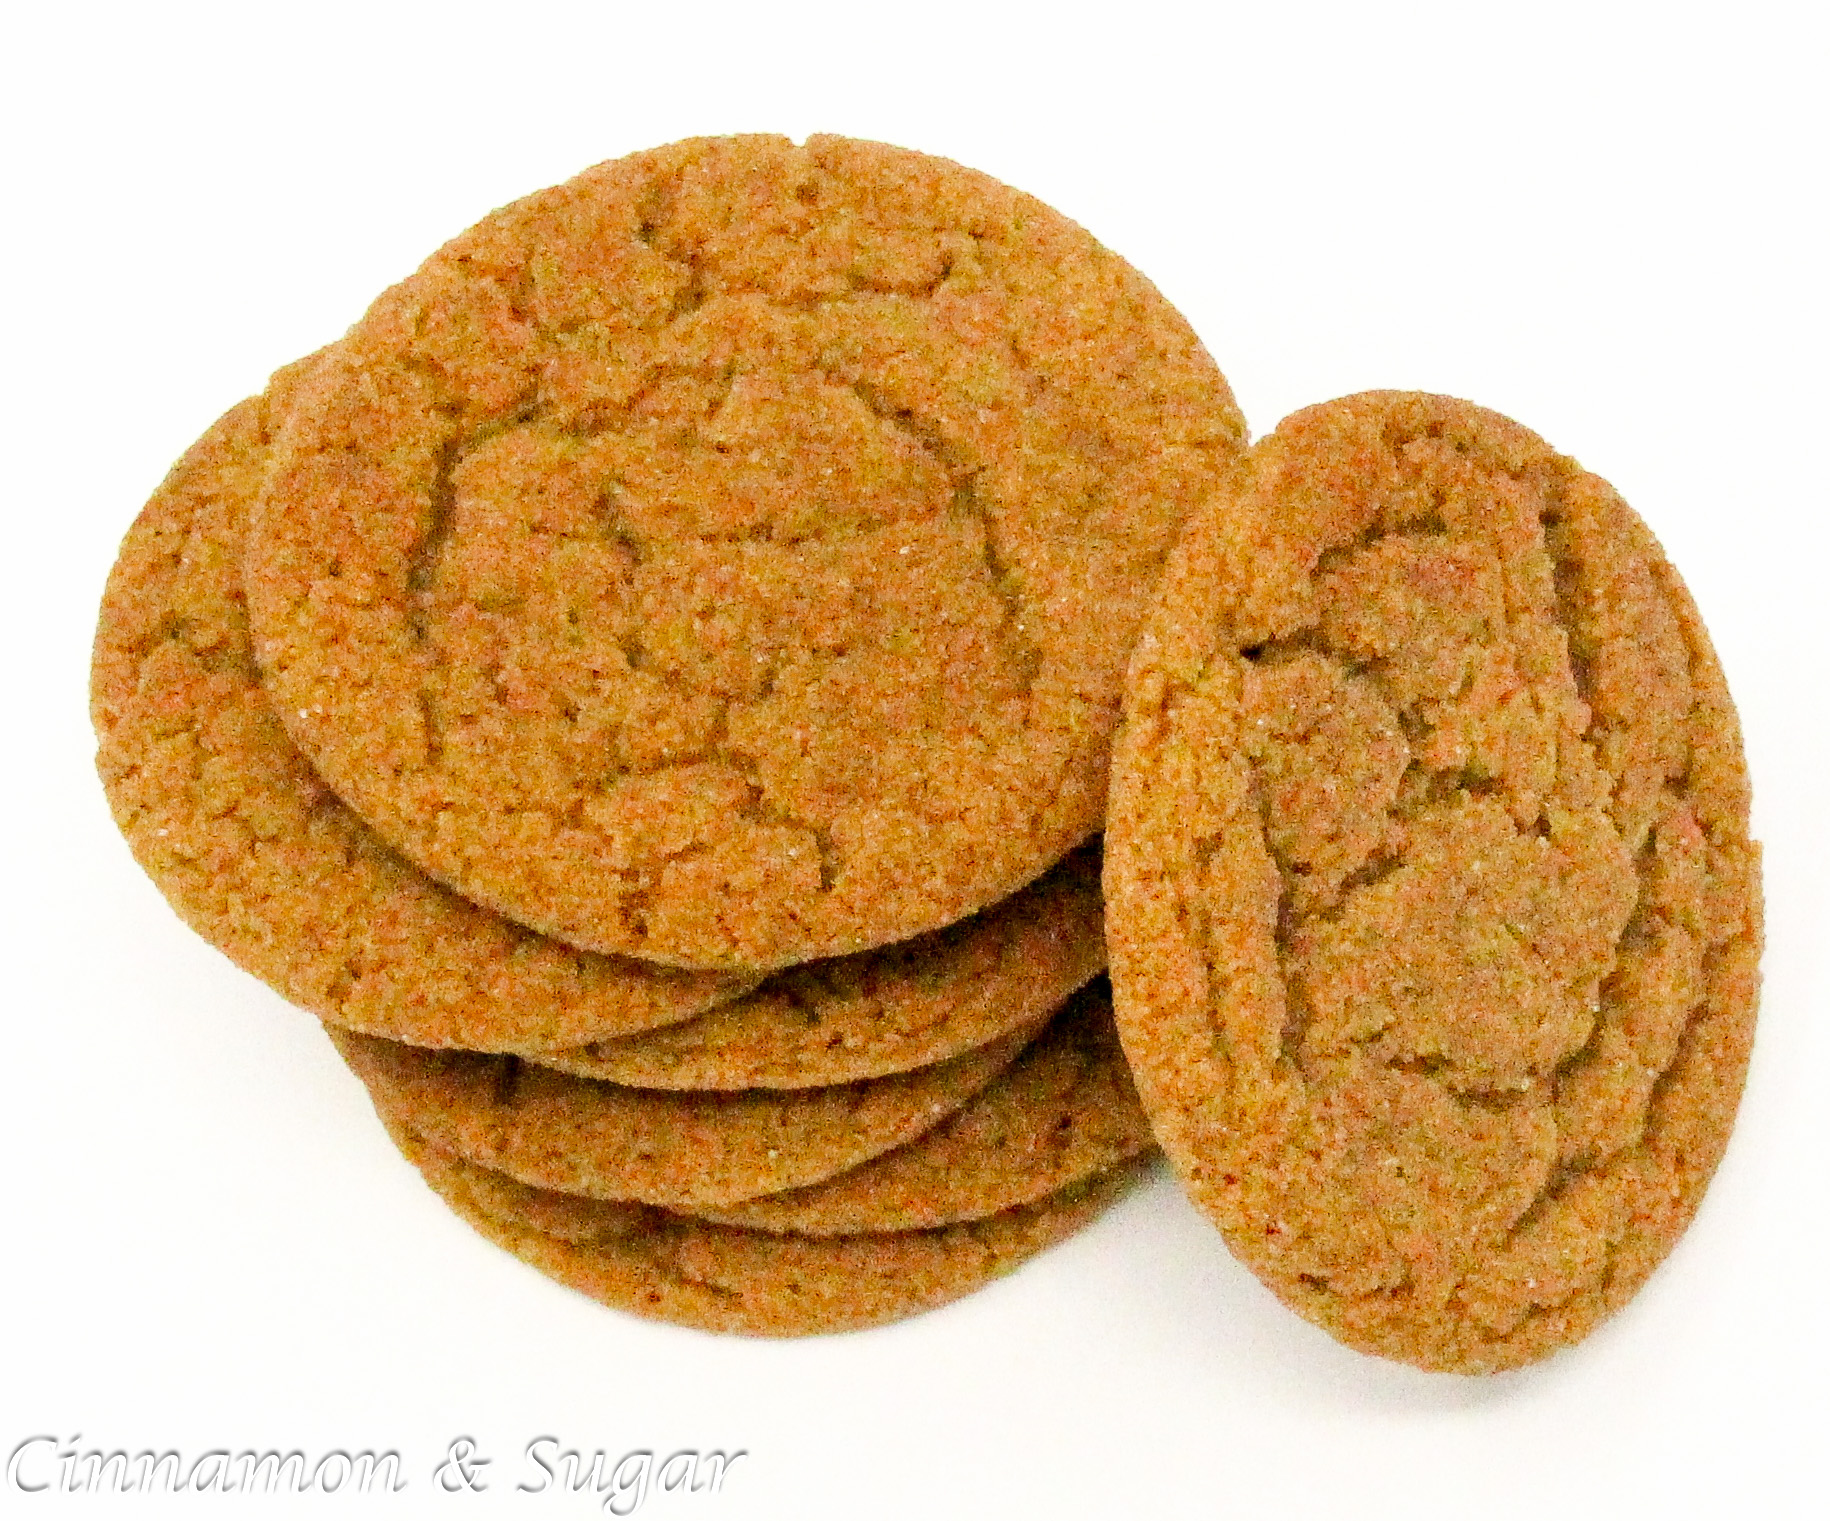 With plenty of warming spices to make taste buds sing, these gingersnap cookies are crispy around the edges and soft and chewy in the middle... perfection! Recipe shared with permission granted by Michelle Hillen Klump, author of A DASH OF DEATH. 